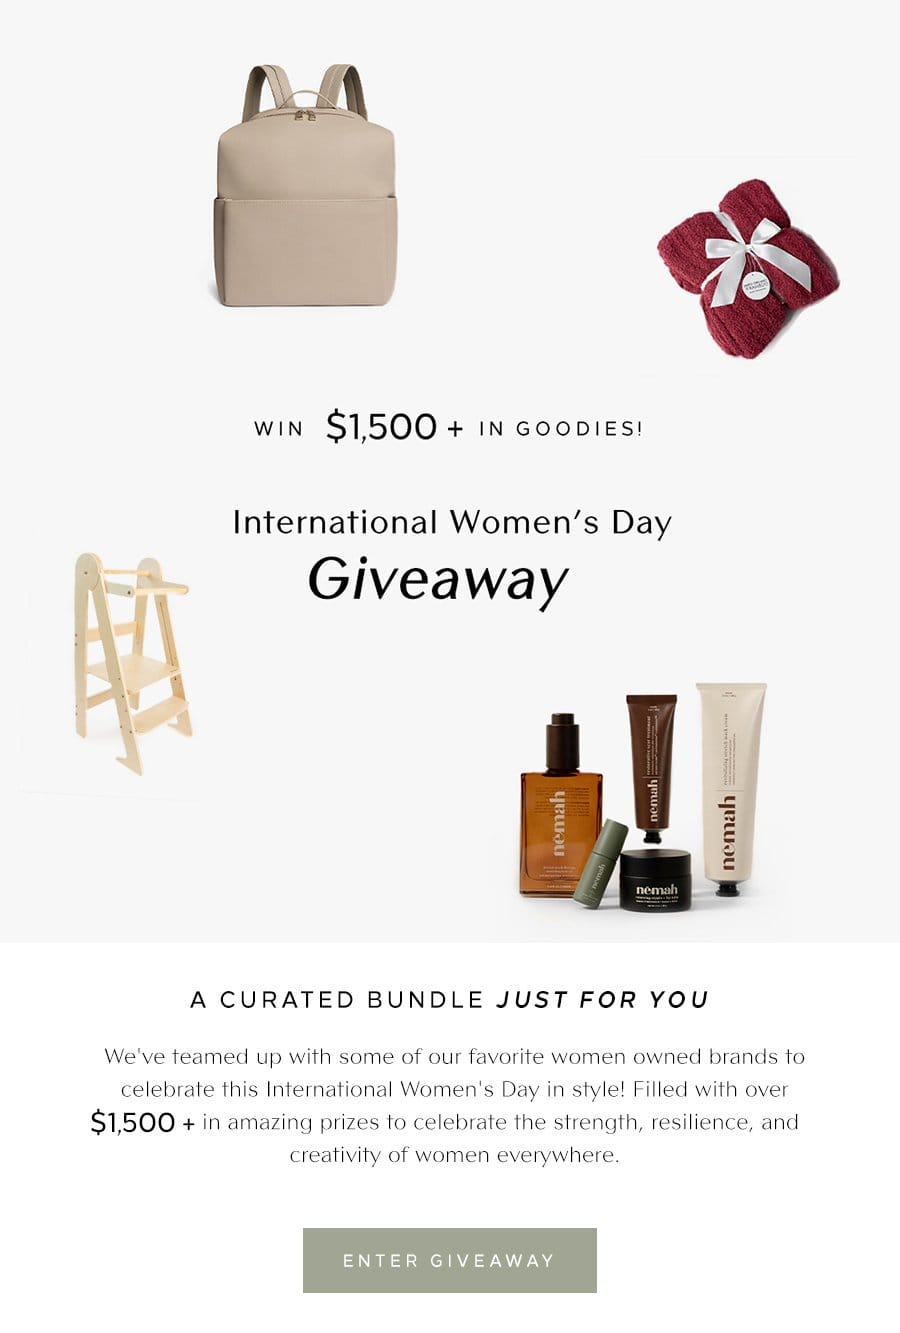 Enter Giveaway to Win \\$1500+ In Prizes!